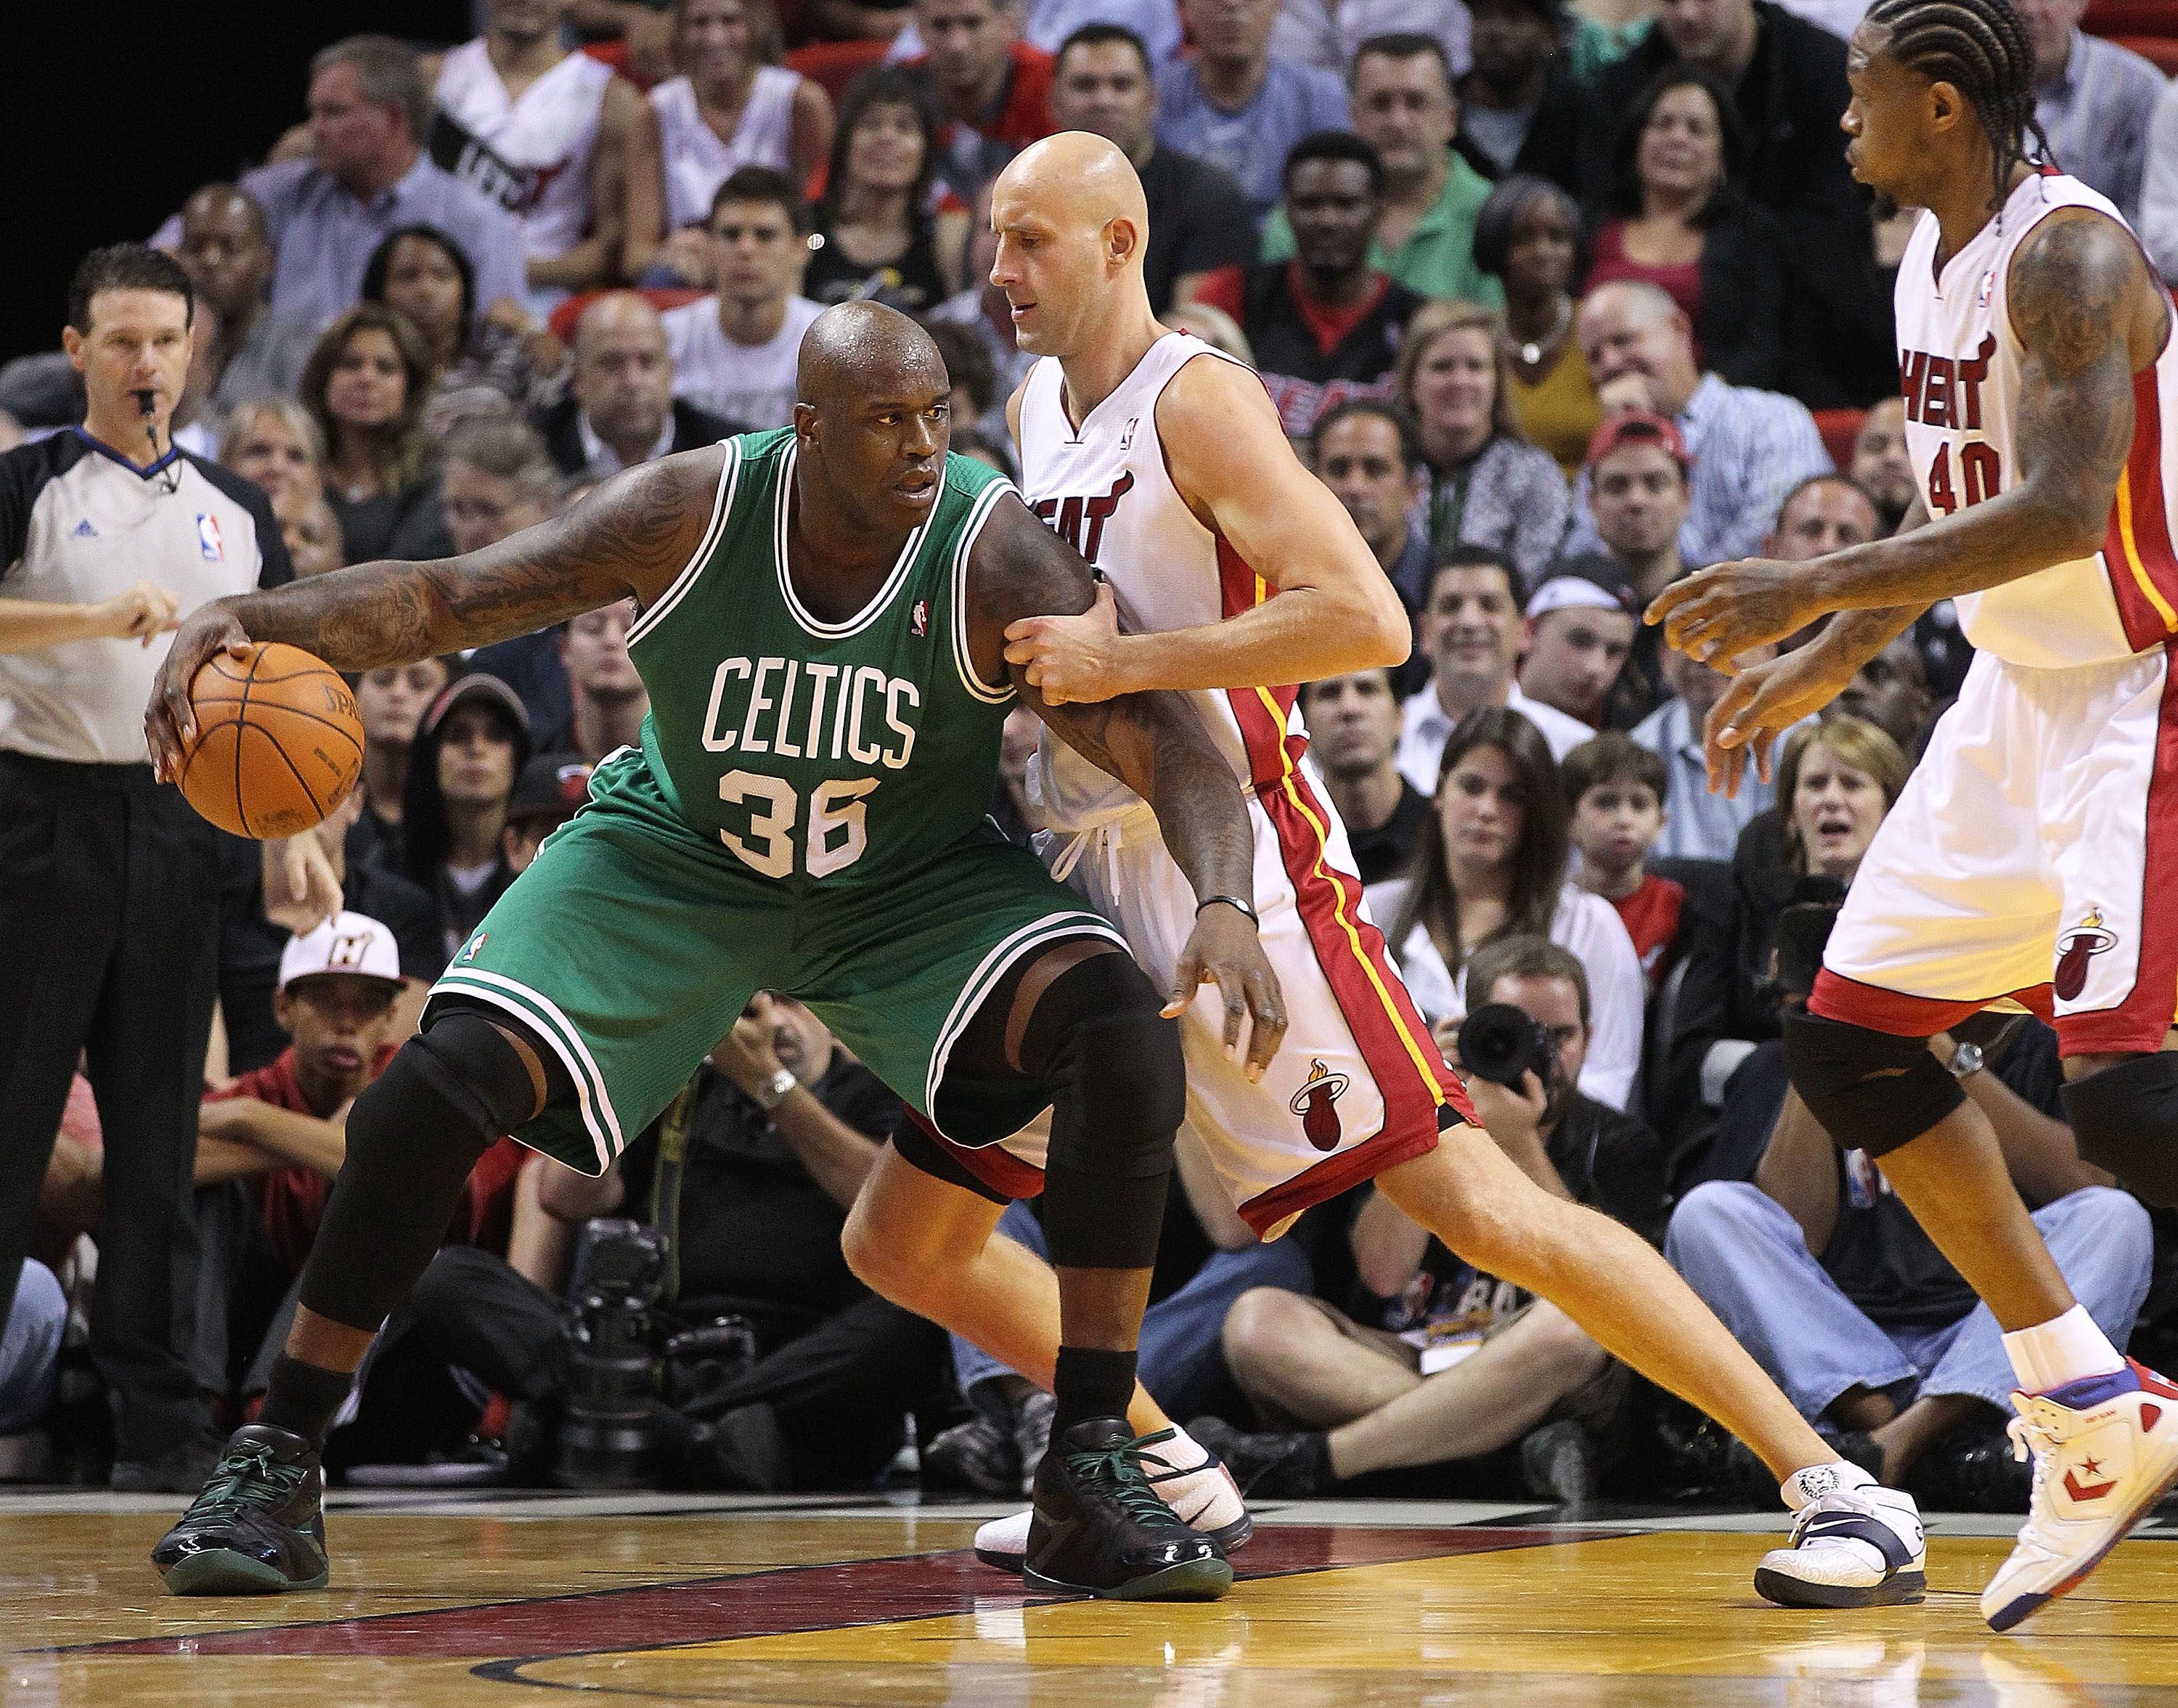 MIAMI - NOVEMBER 11:  Shaquille O'Neal #36 of the Boston Celtics is guarded by Zydrunas Ilgauskas #11 during a game against the Miami Heat at American Airlines Arena on November 11, 2010 in Miami, Florida. NOTE TO USER: User expressly acknowledges and agr